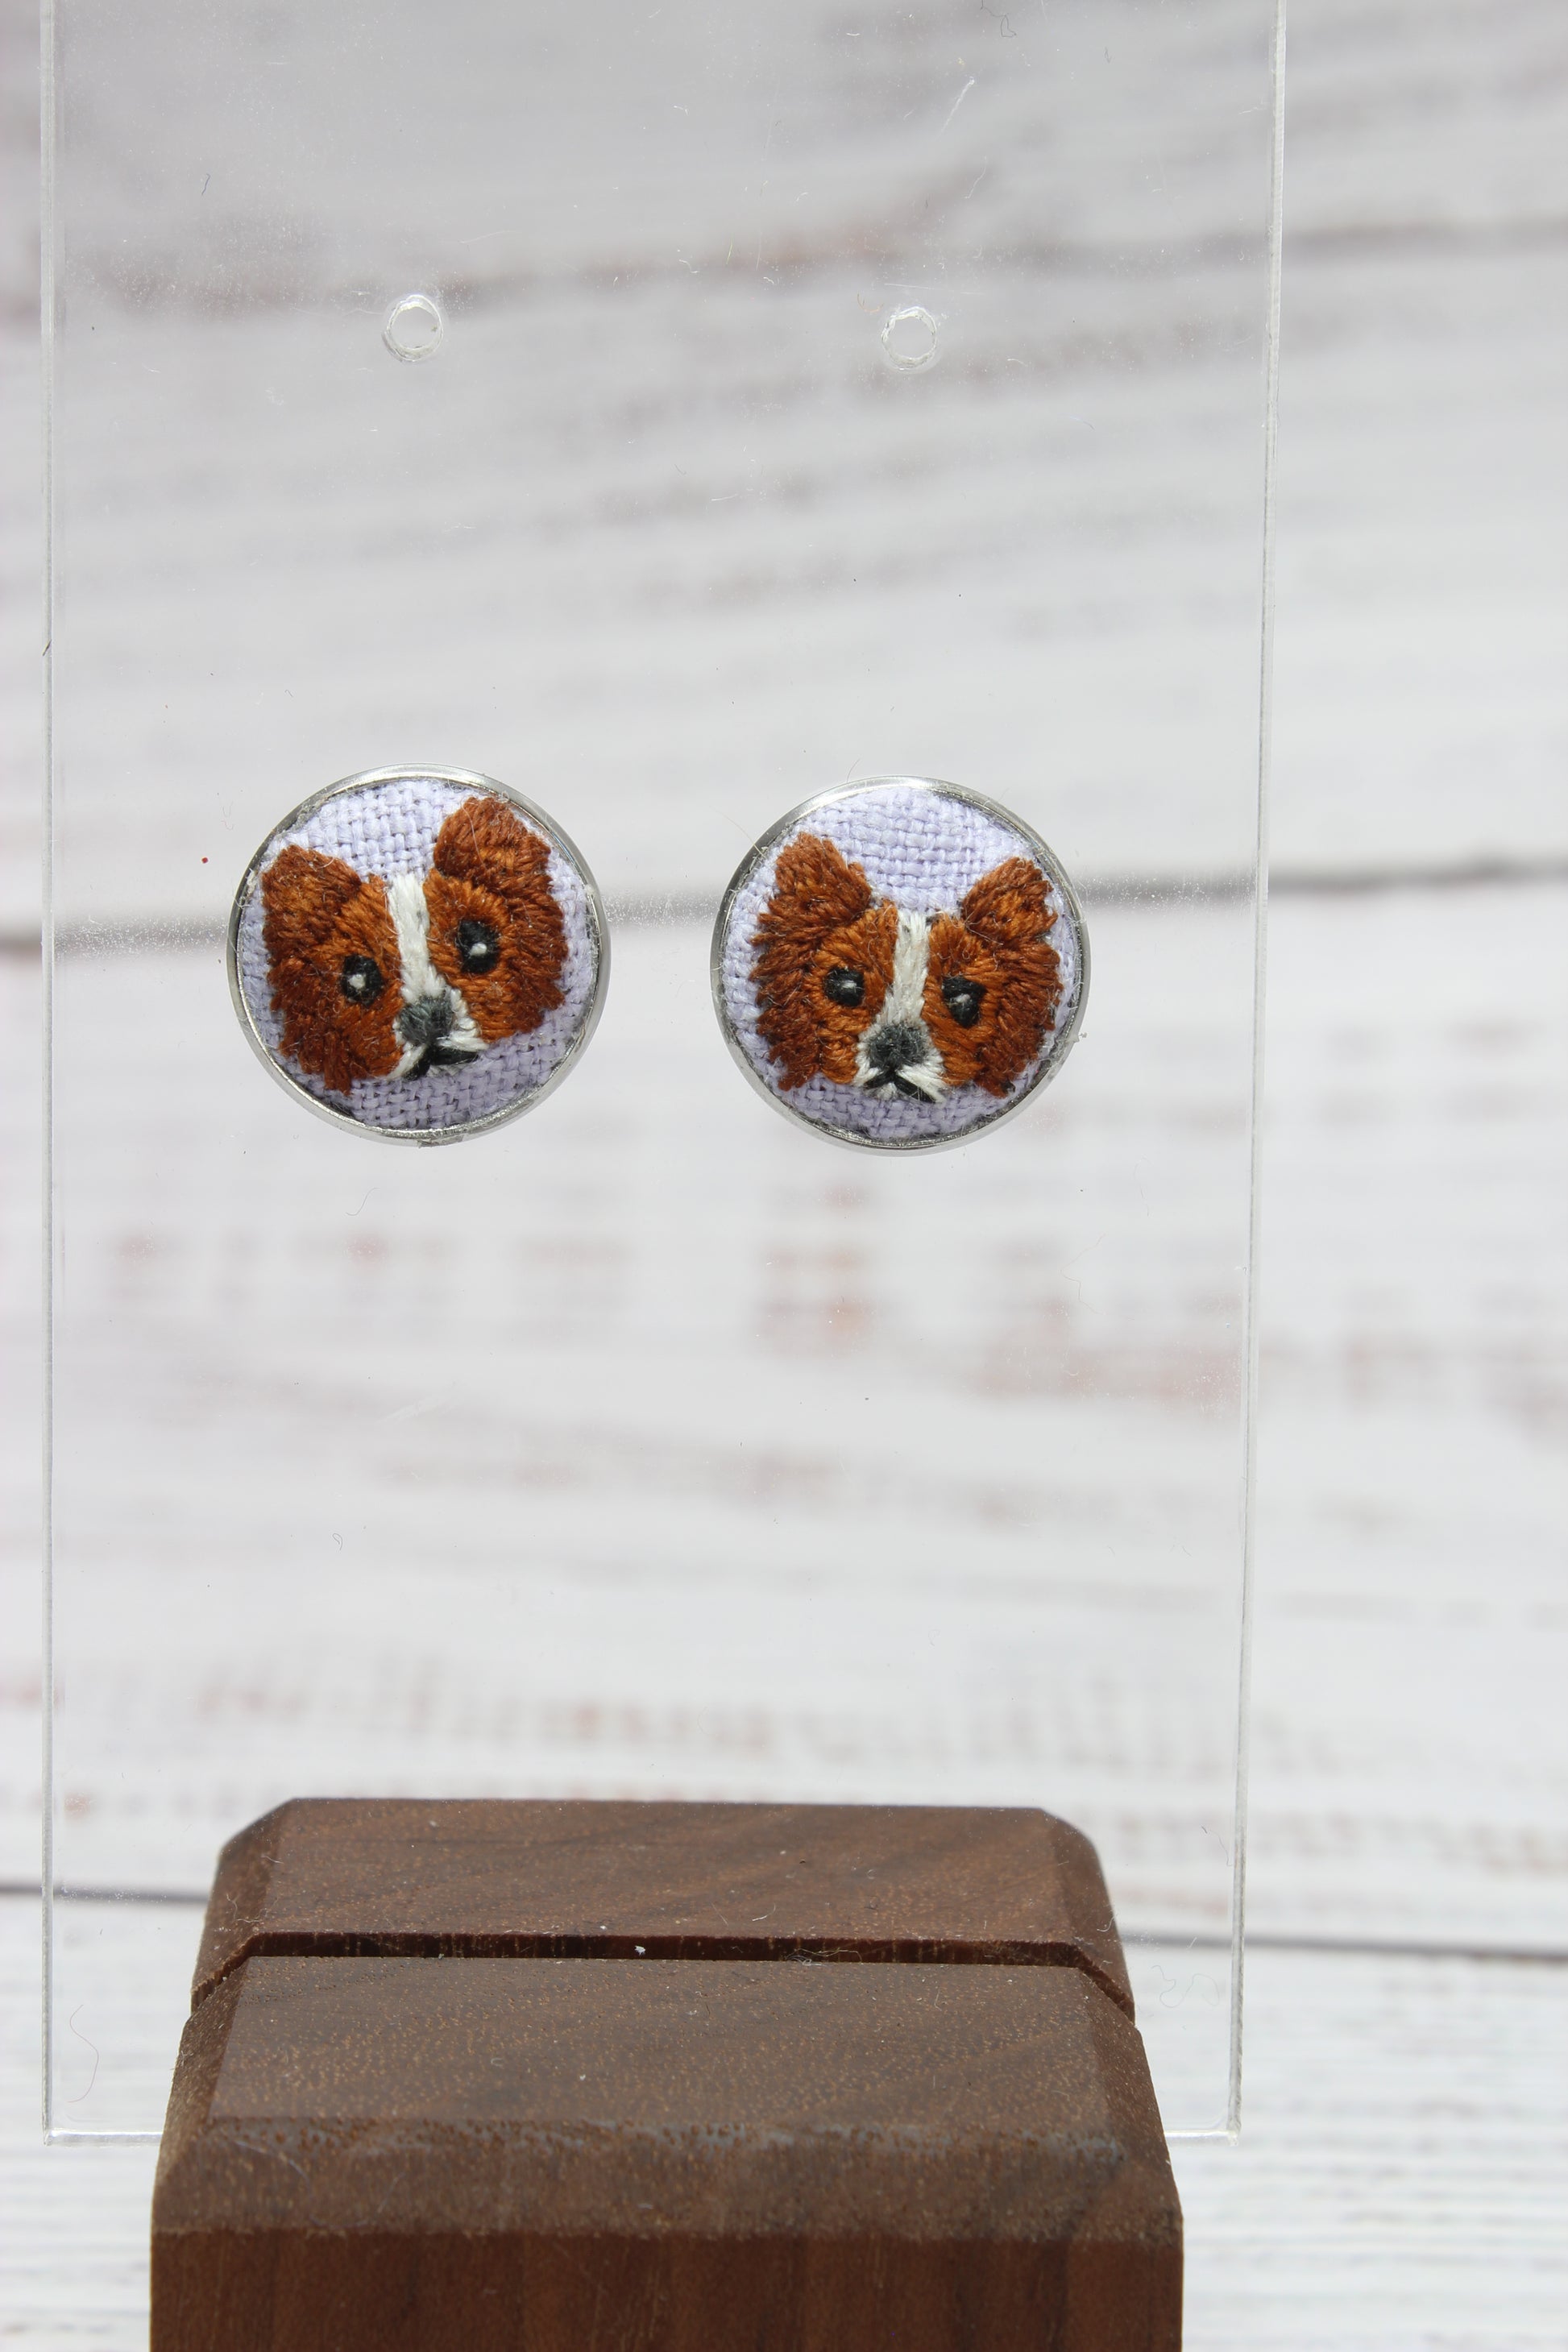 Embroidery Papillon Dog Studs Earrings